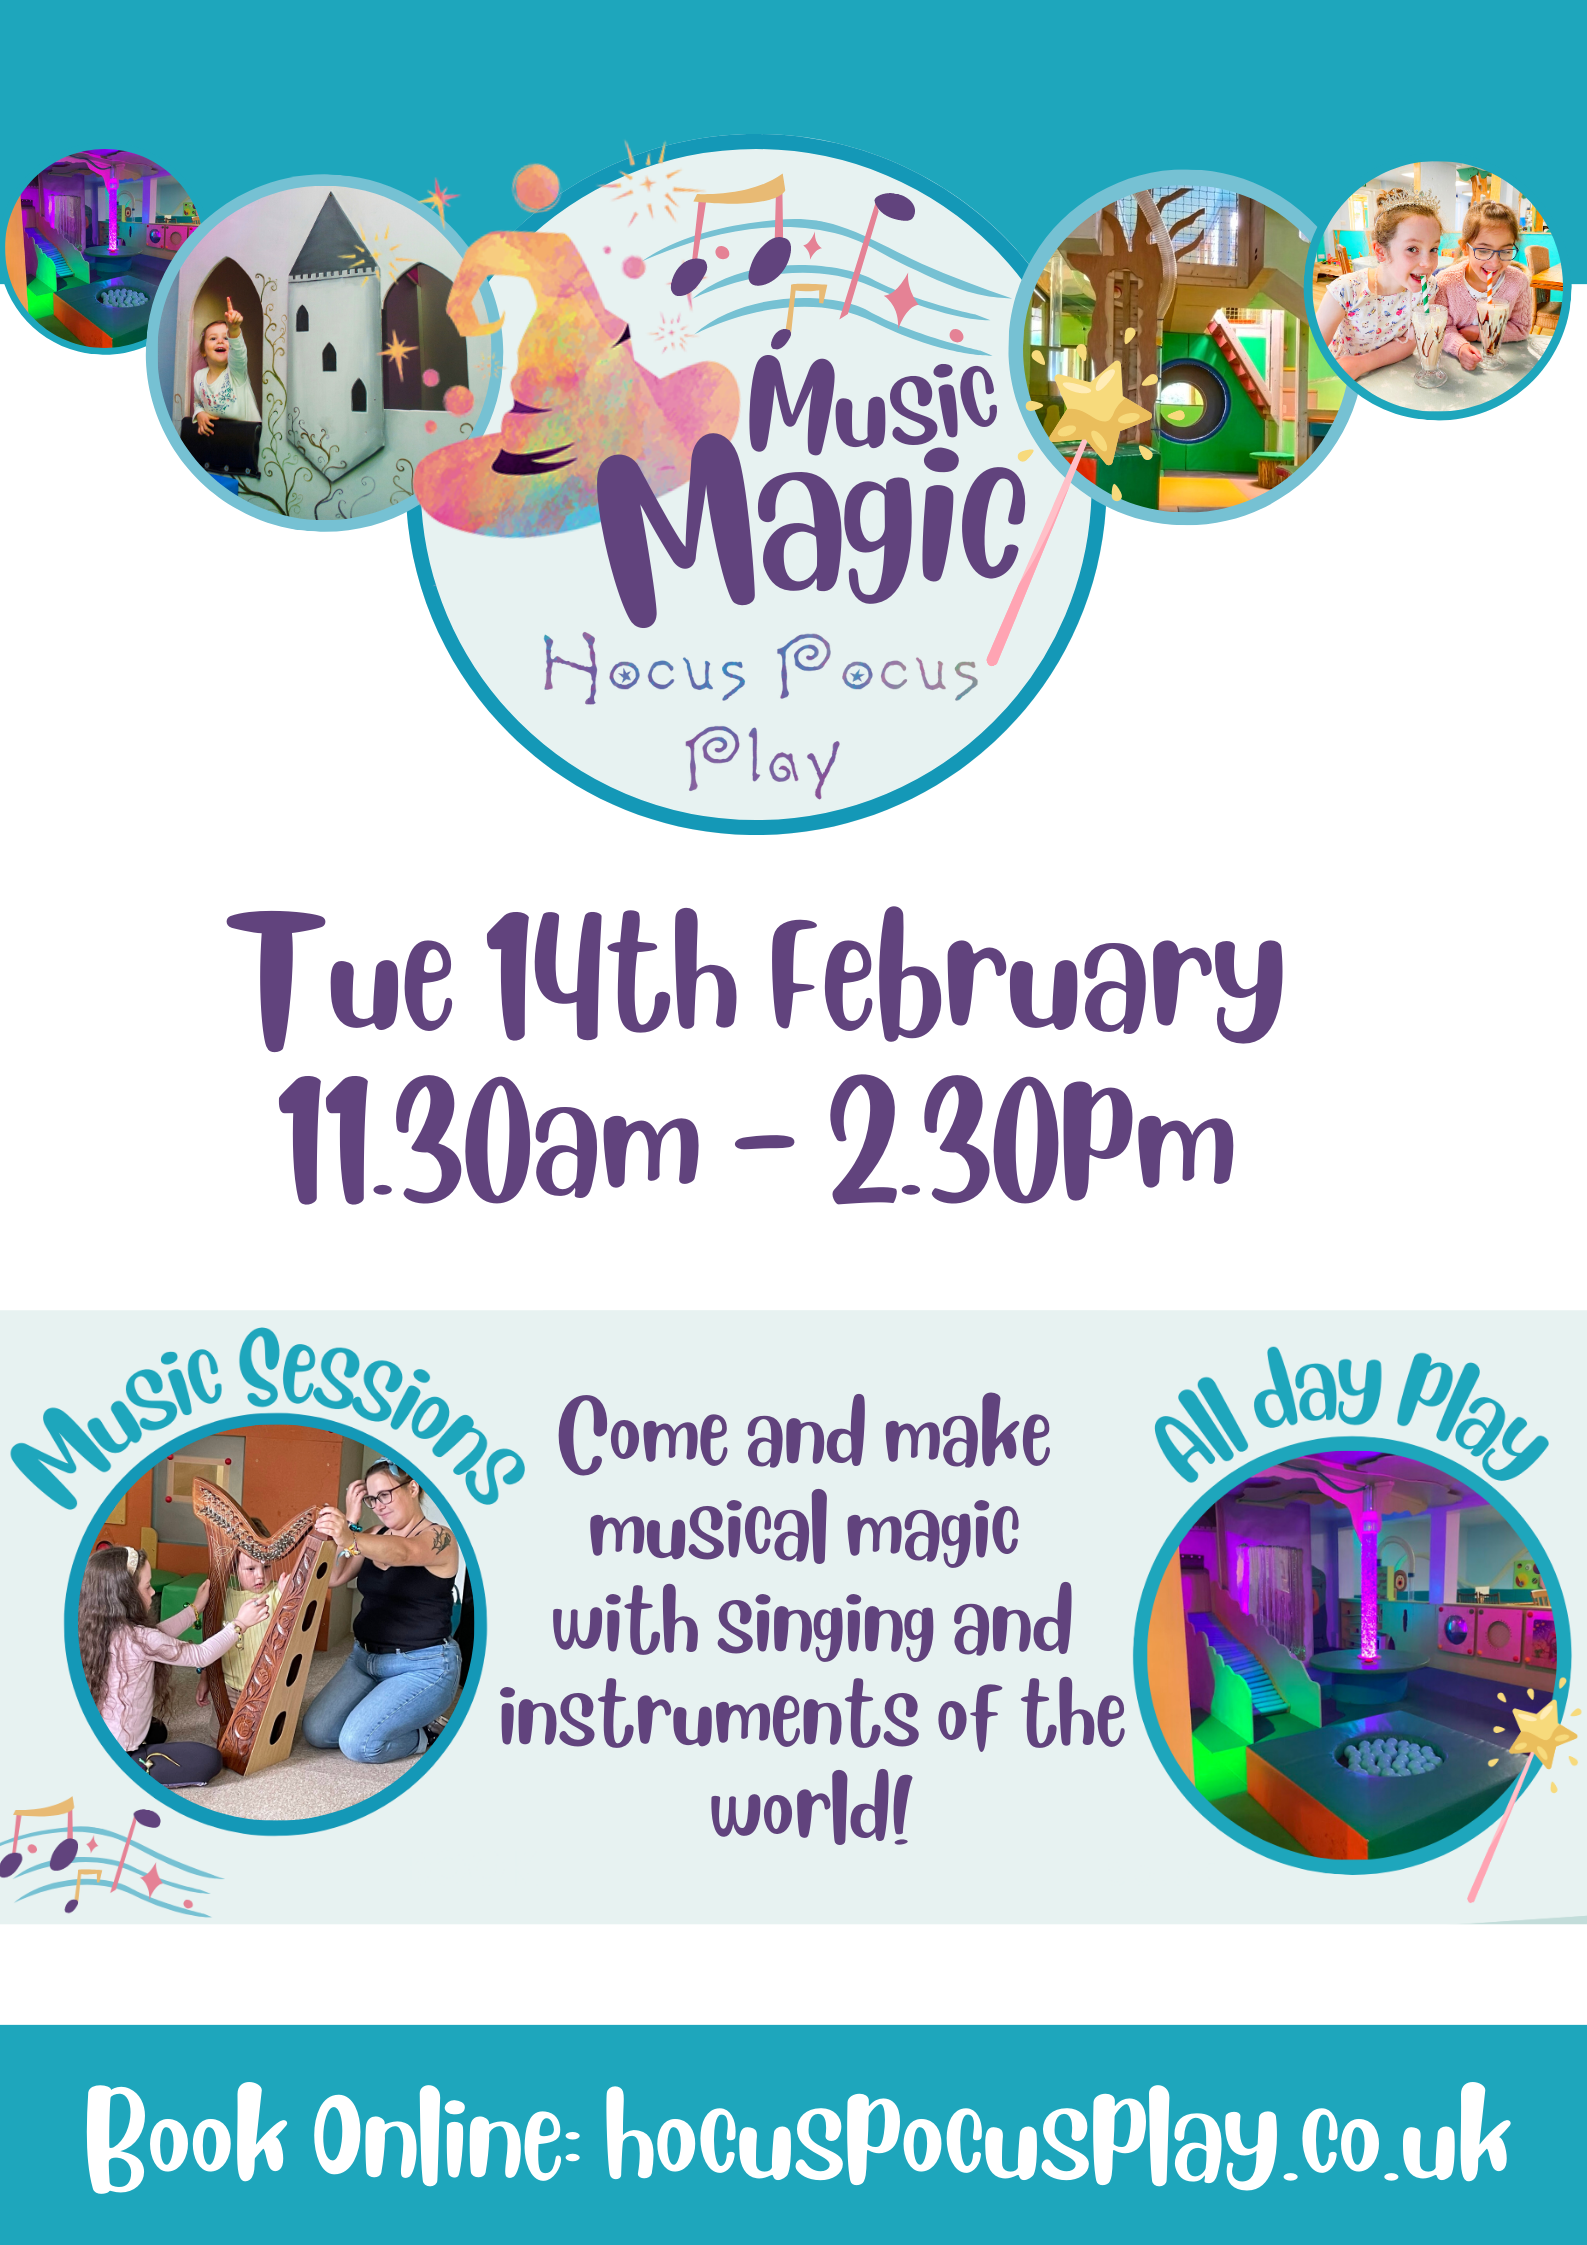 Music Magic - Tuesday 14th February from 11:30am to 2:30pm. Come and make musical magic with singing and instruments of the world!